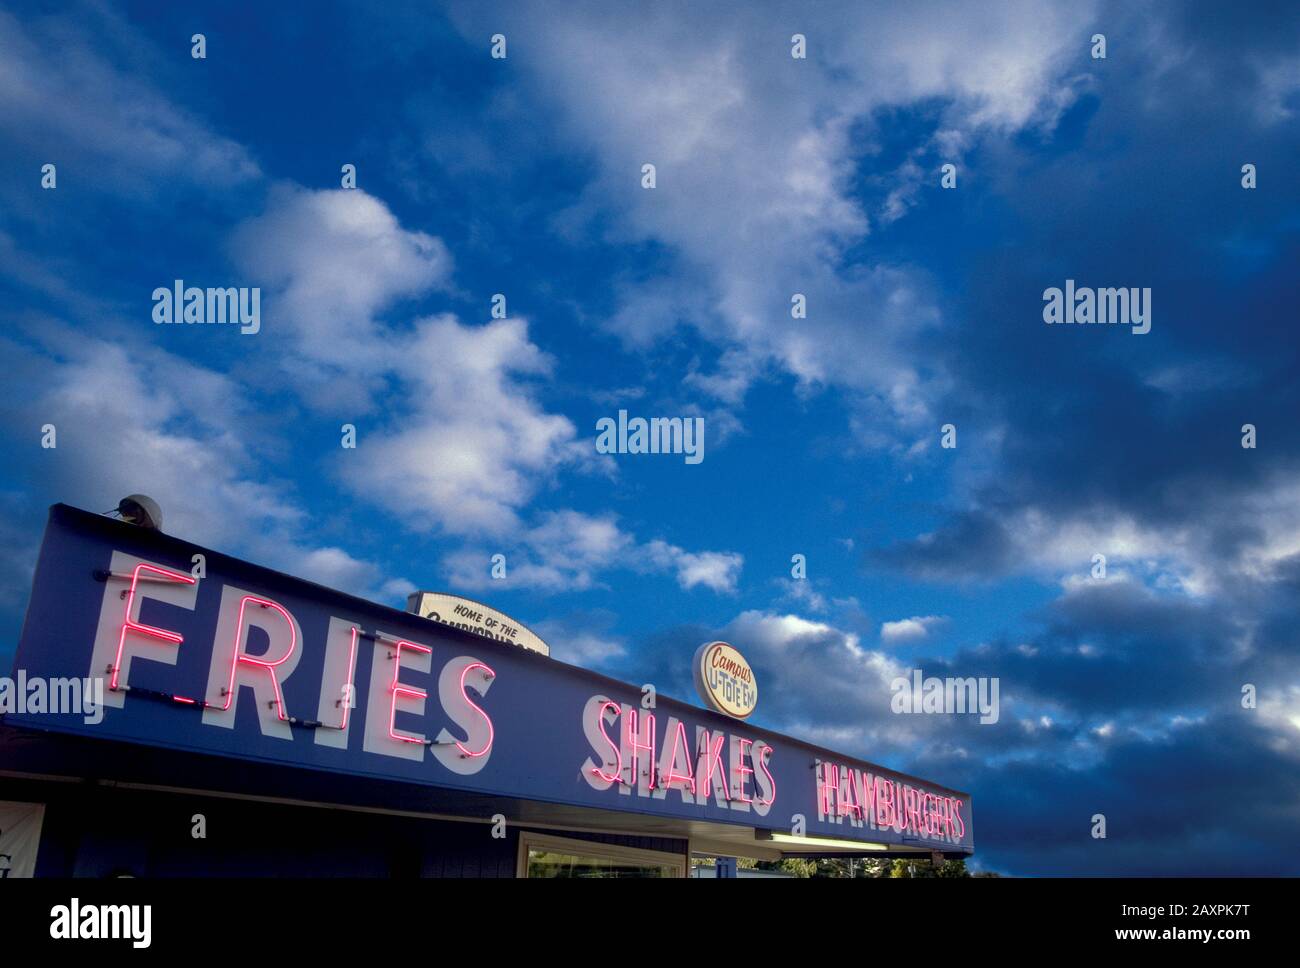 Neon sign on a diner advertising fries shakes and hamburgers under a darkening evening sky Stock Photo